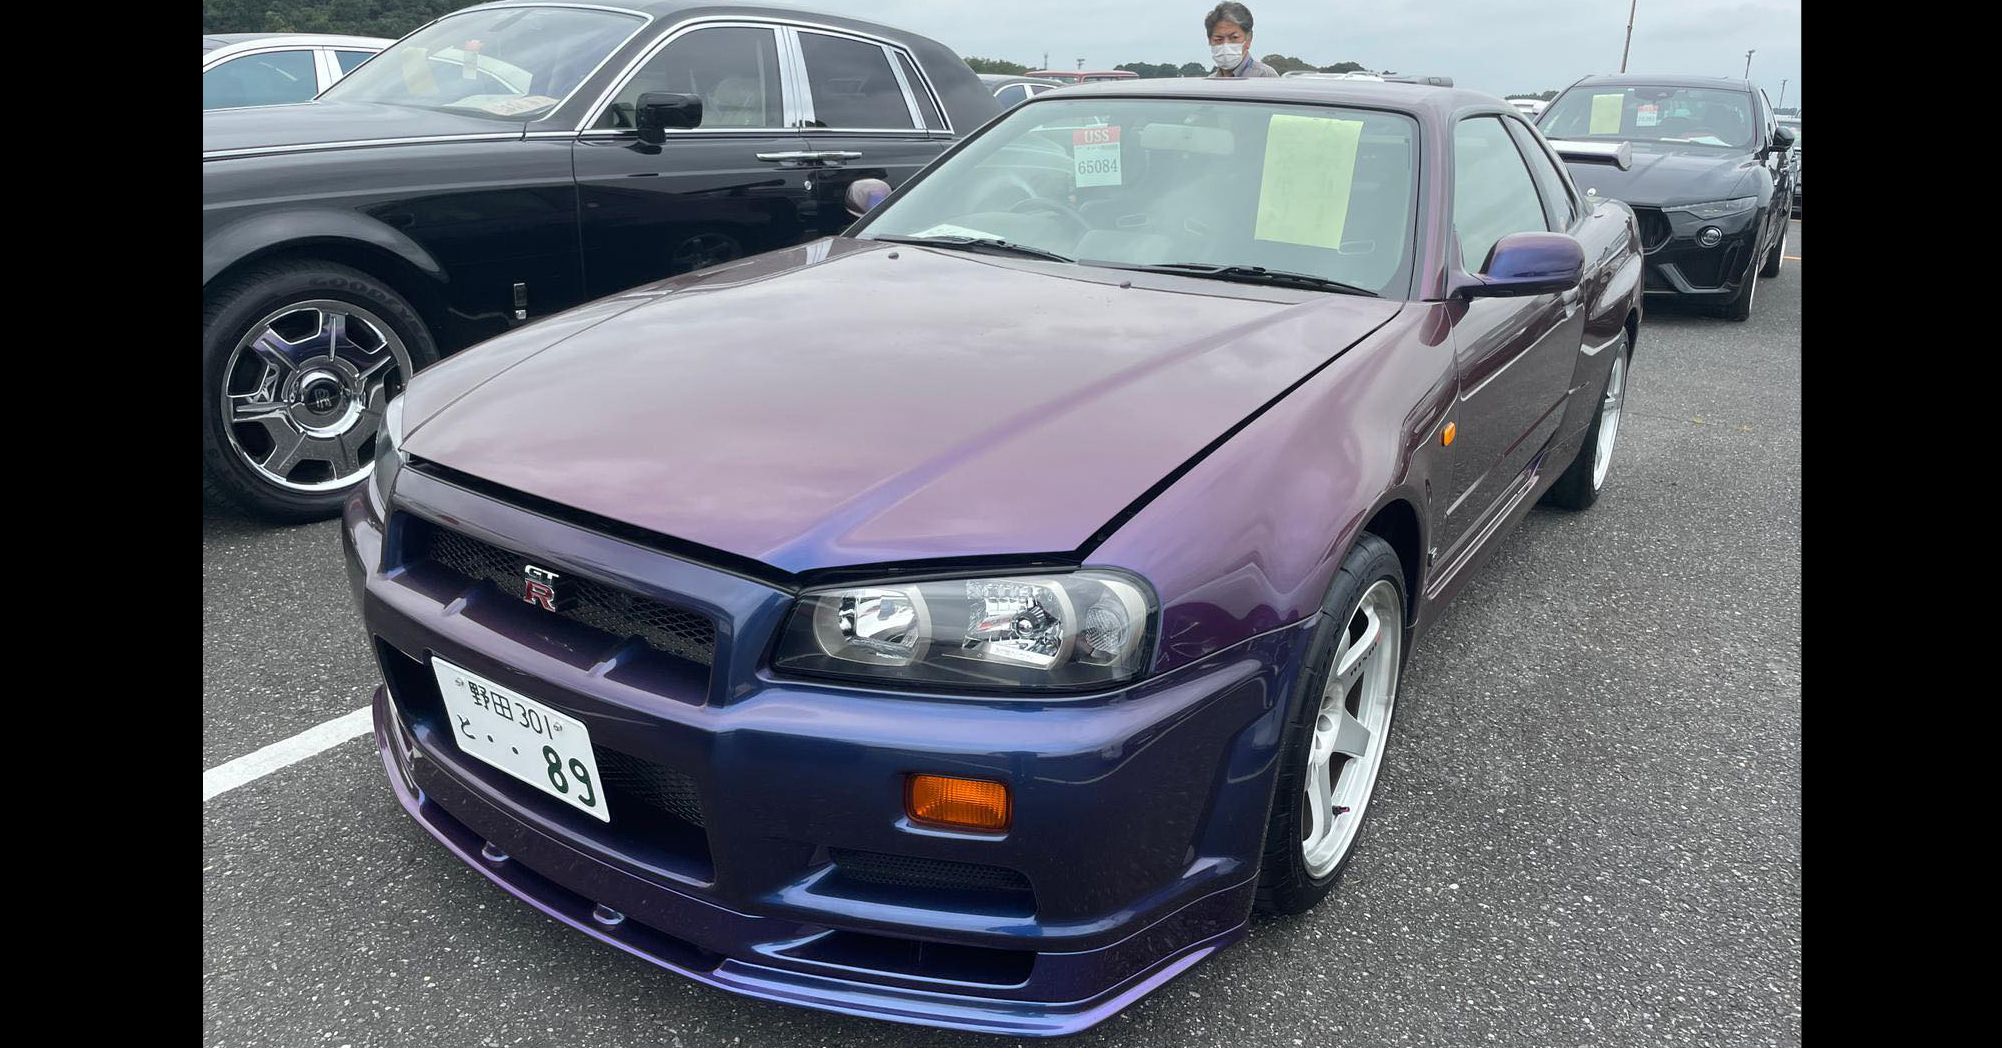 Mint R34 Nissan Gt R V Spec Sold For A Record Rm1 38 Million